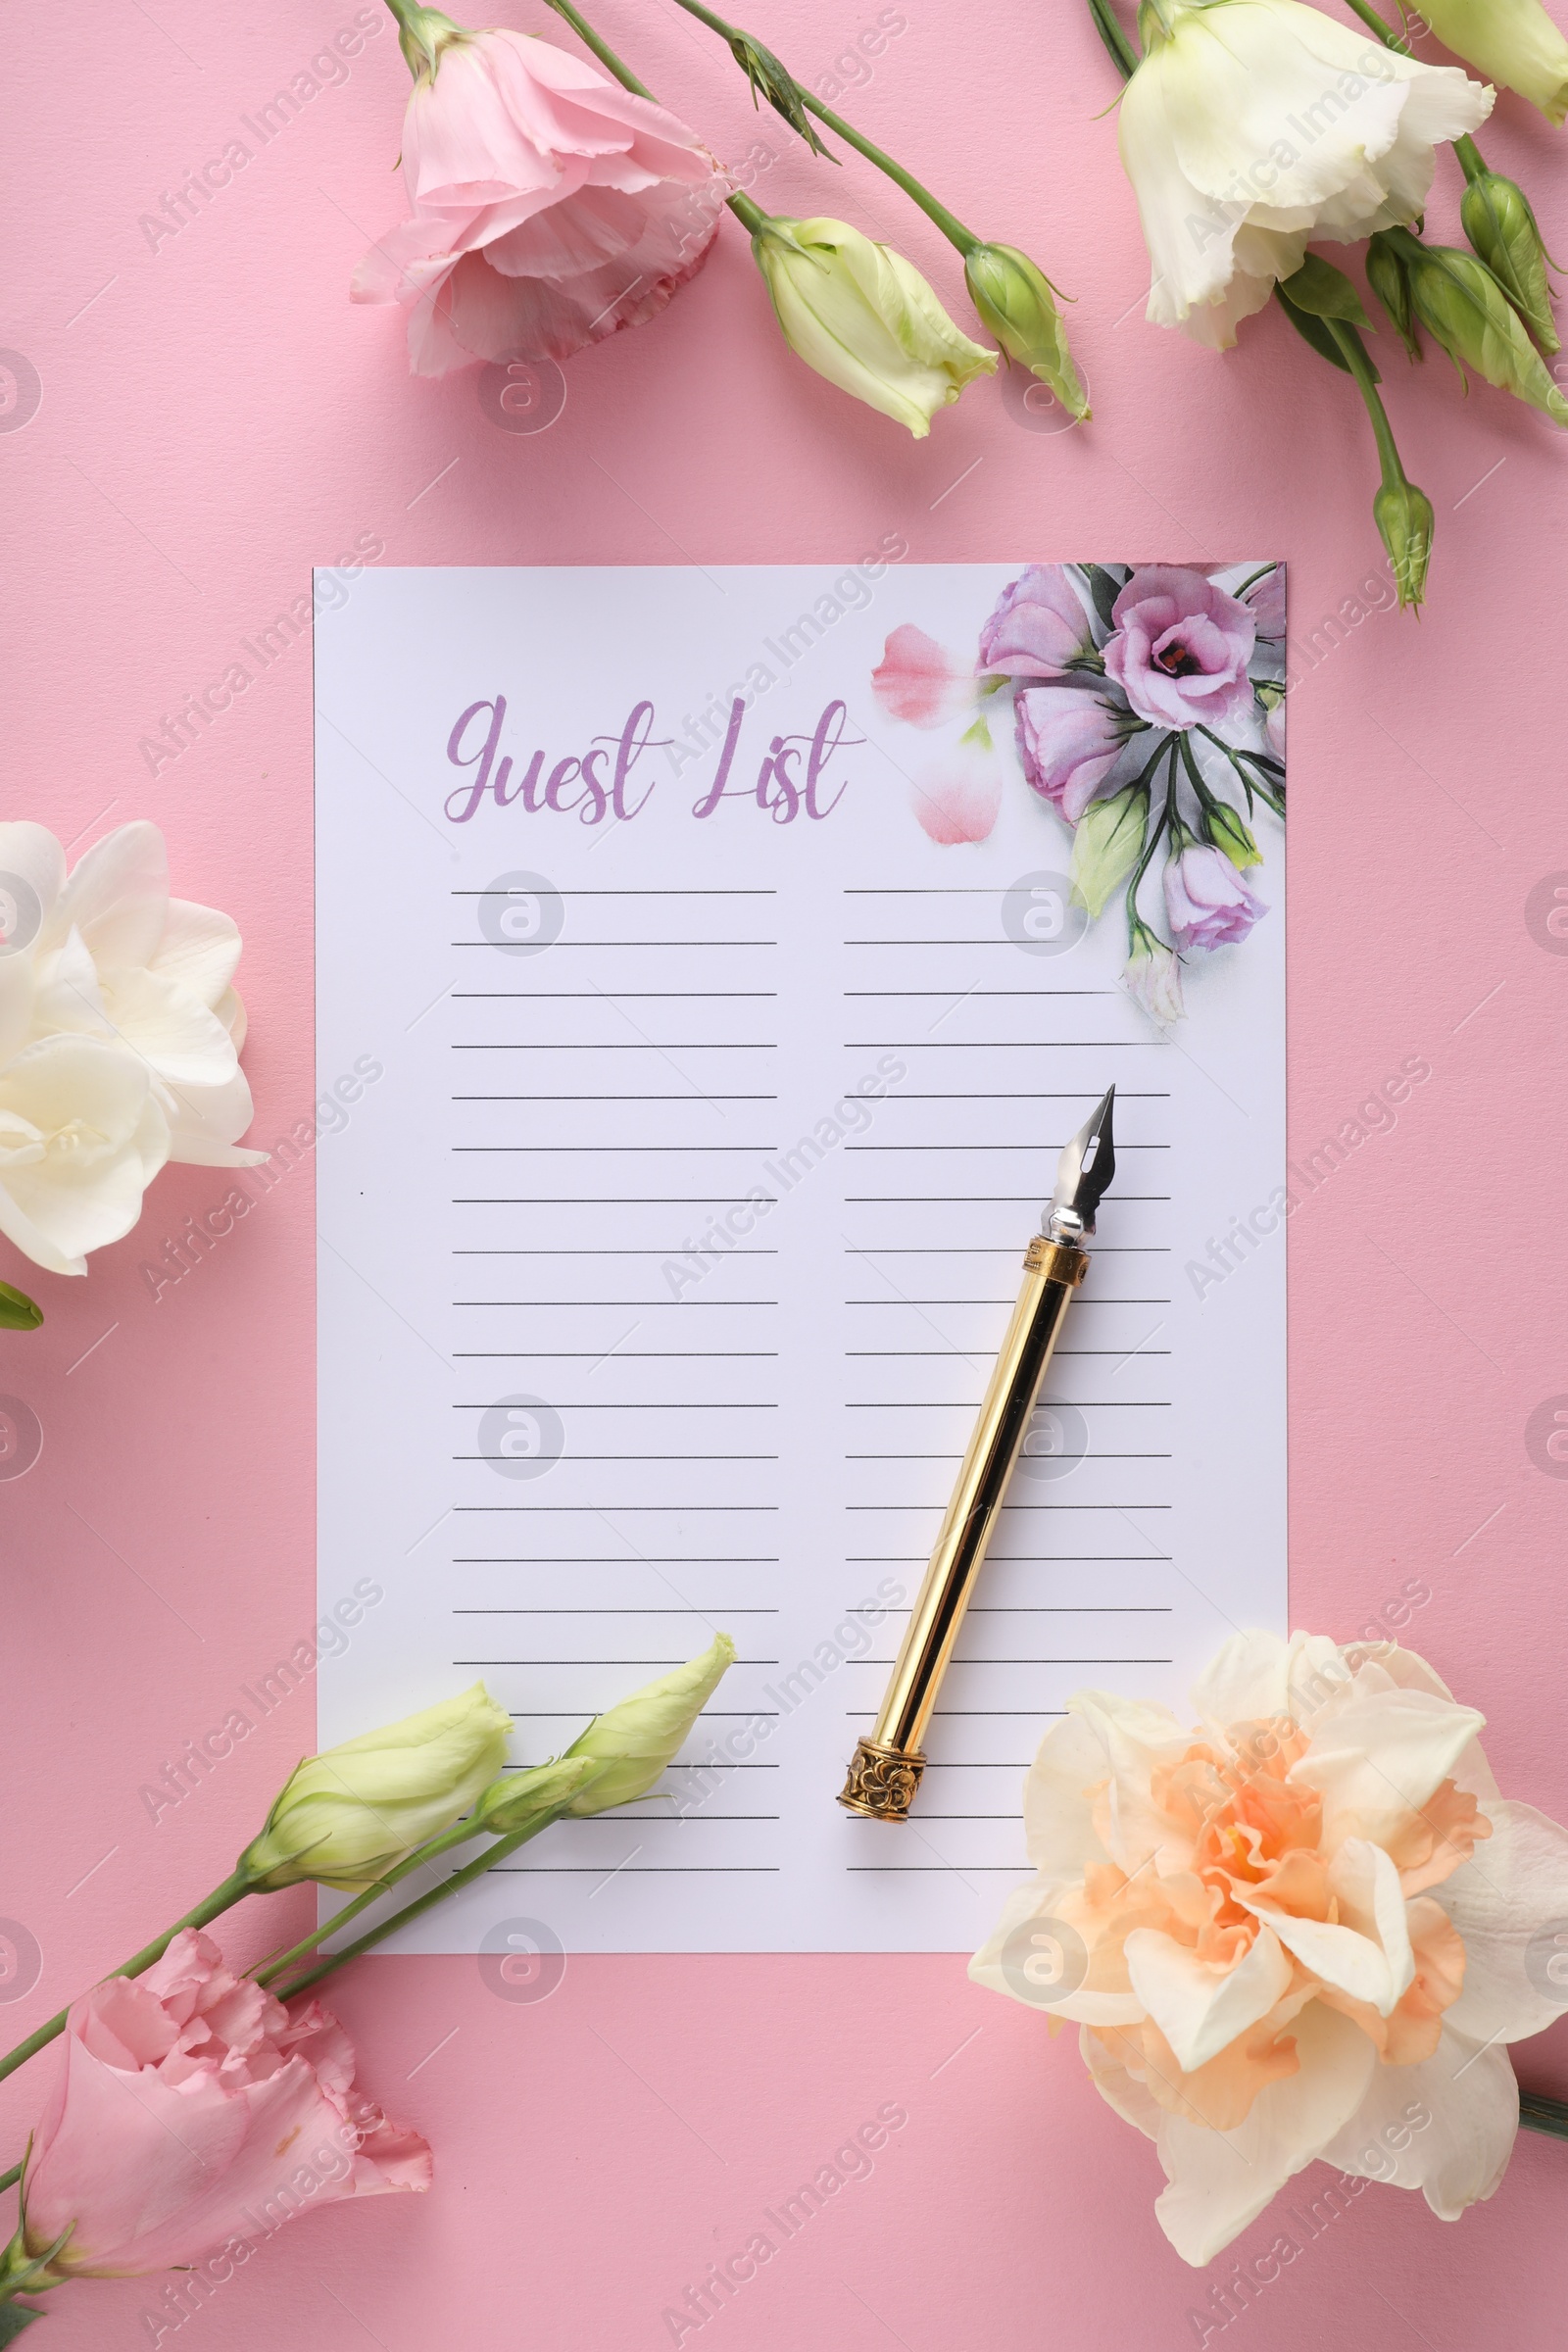 Photo of Guest list, pen and beautiful flowers on pink background, flat lay. Space for text